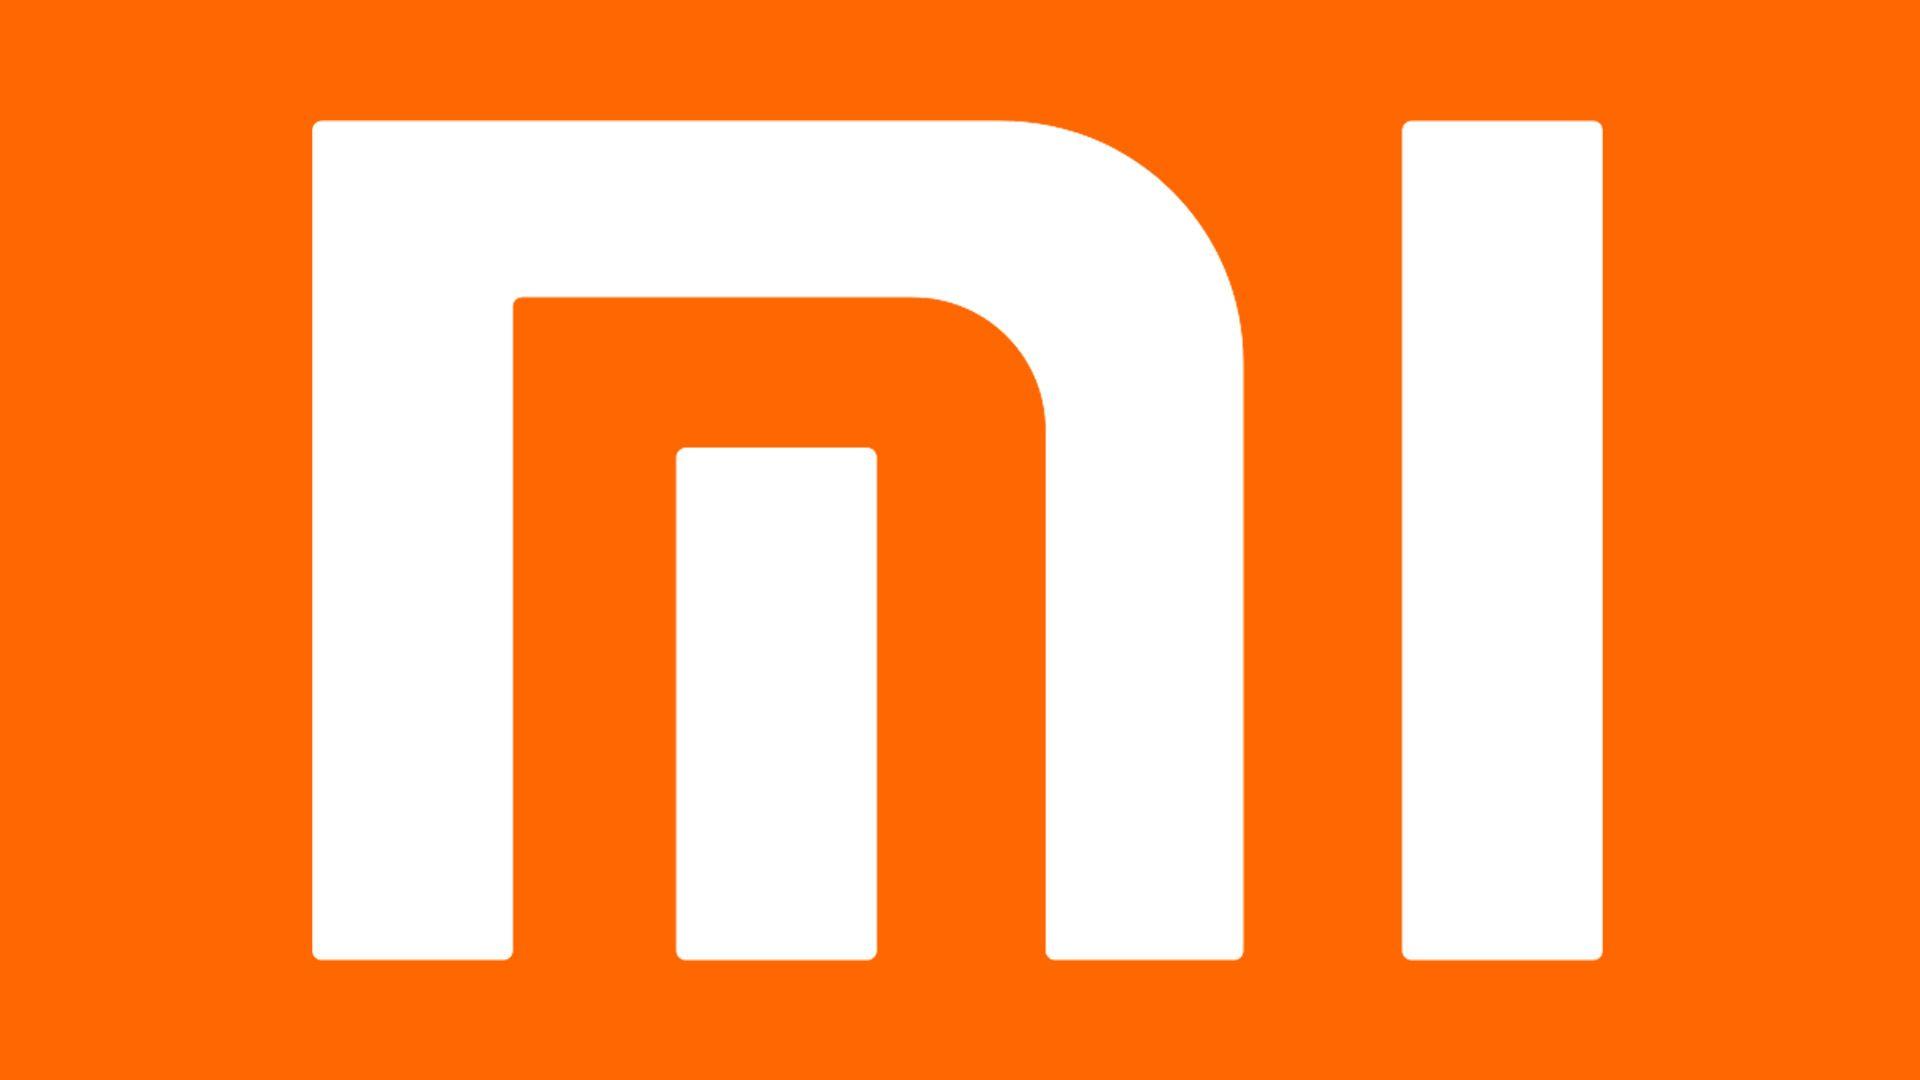 Orange and White Logo - Xiaomi logo, symbol, meaning, History and Evolution